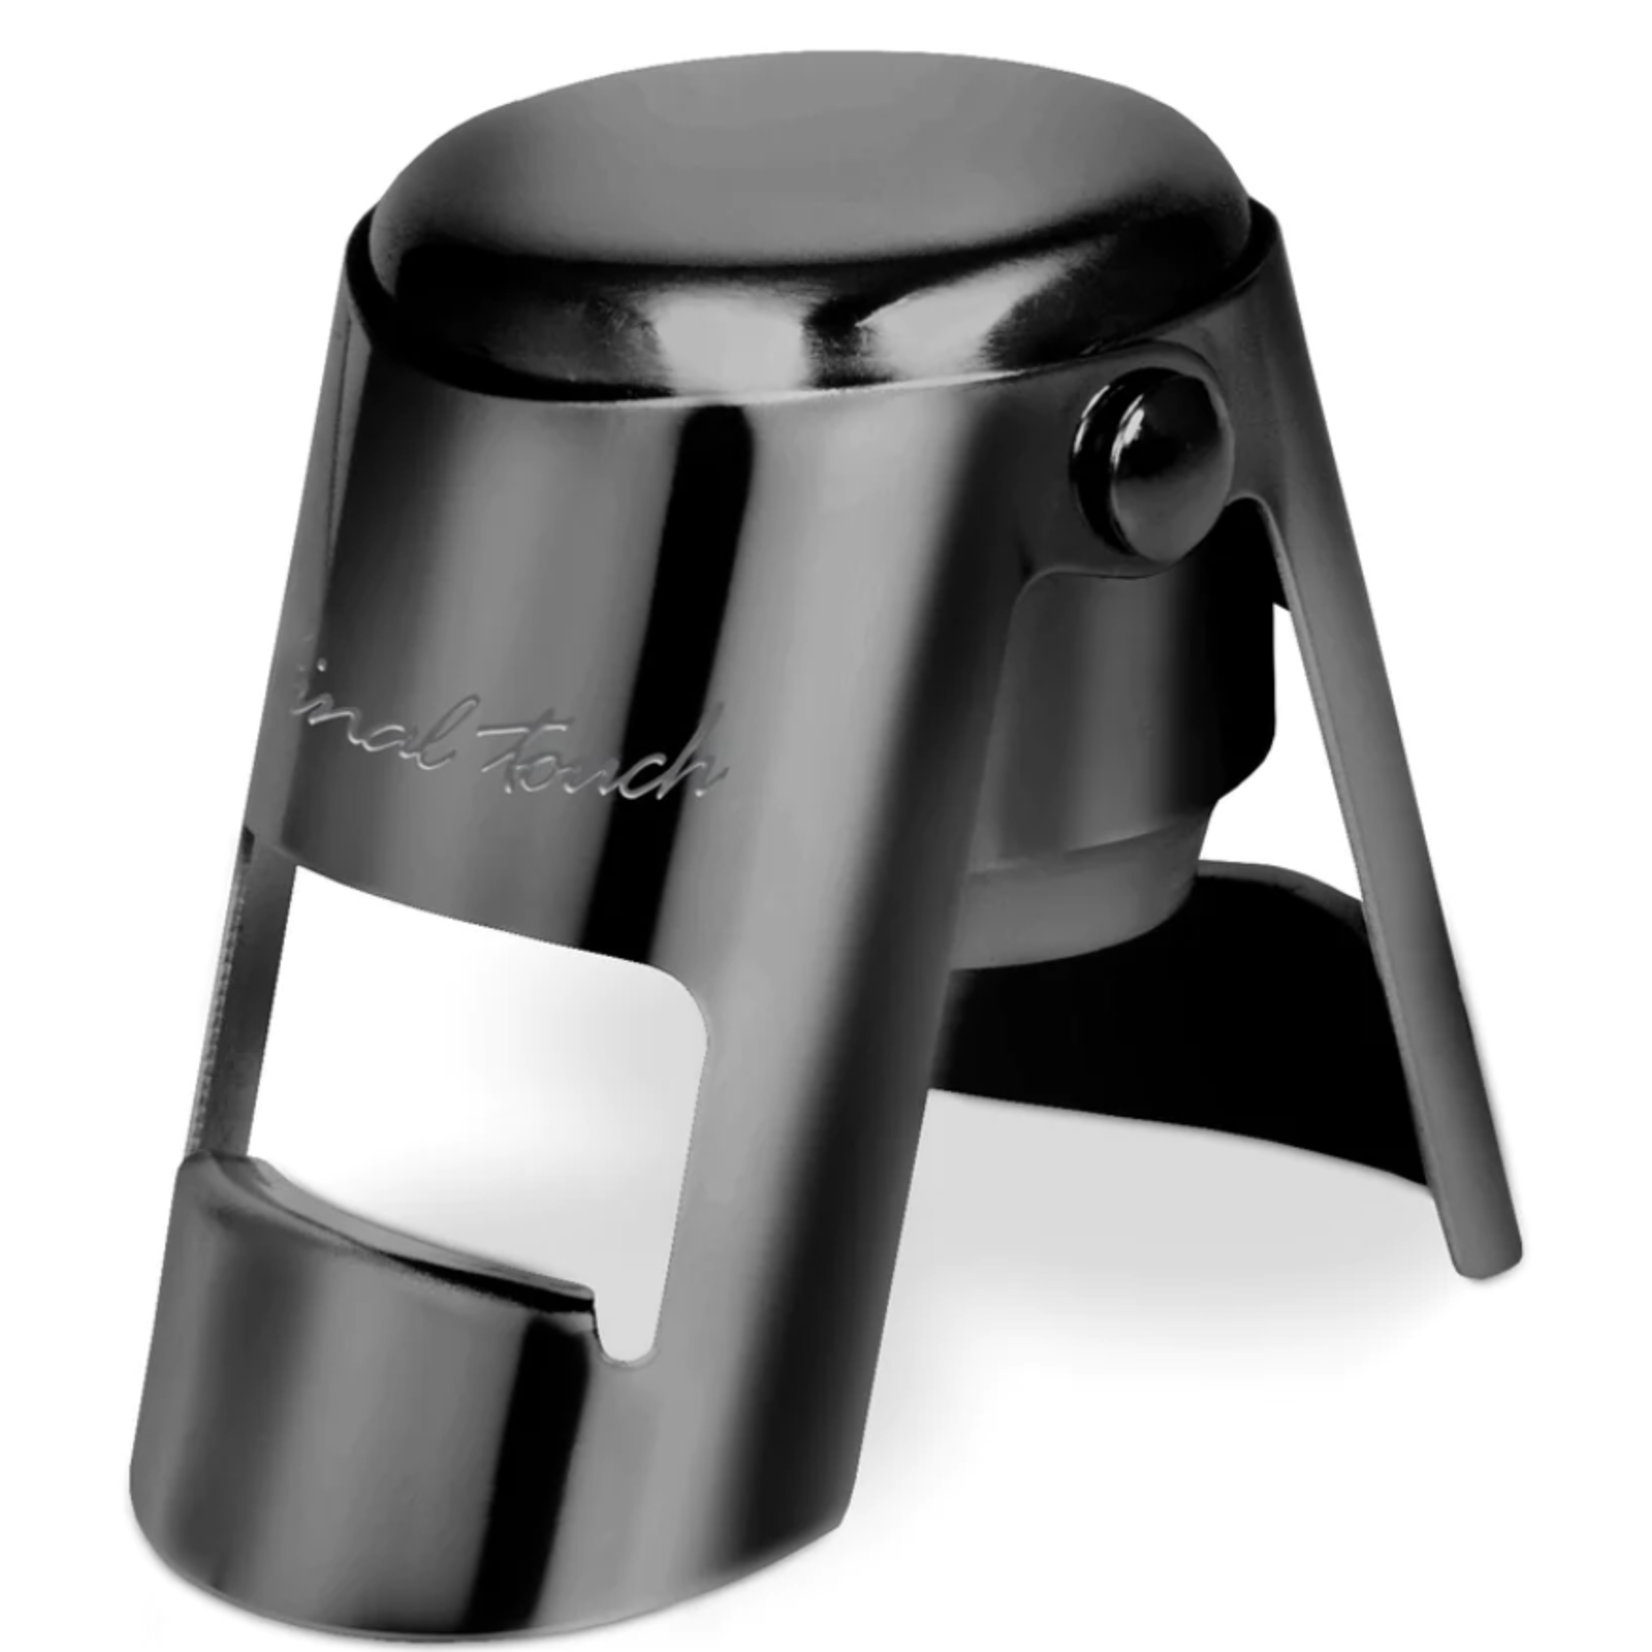 FINAL TOUCH FINAL TOUCH Champagne Bottle Stopper - Black Chrome